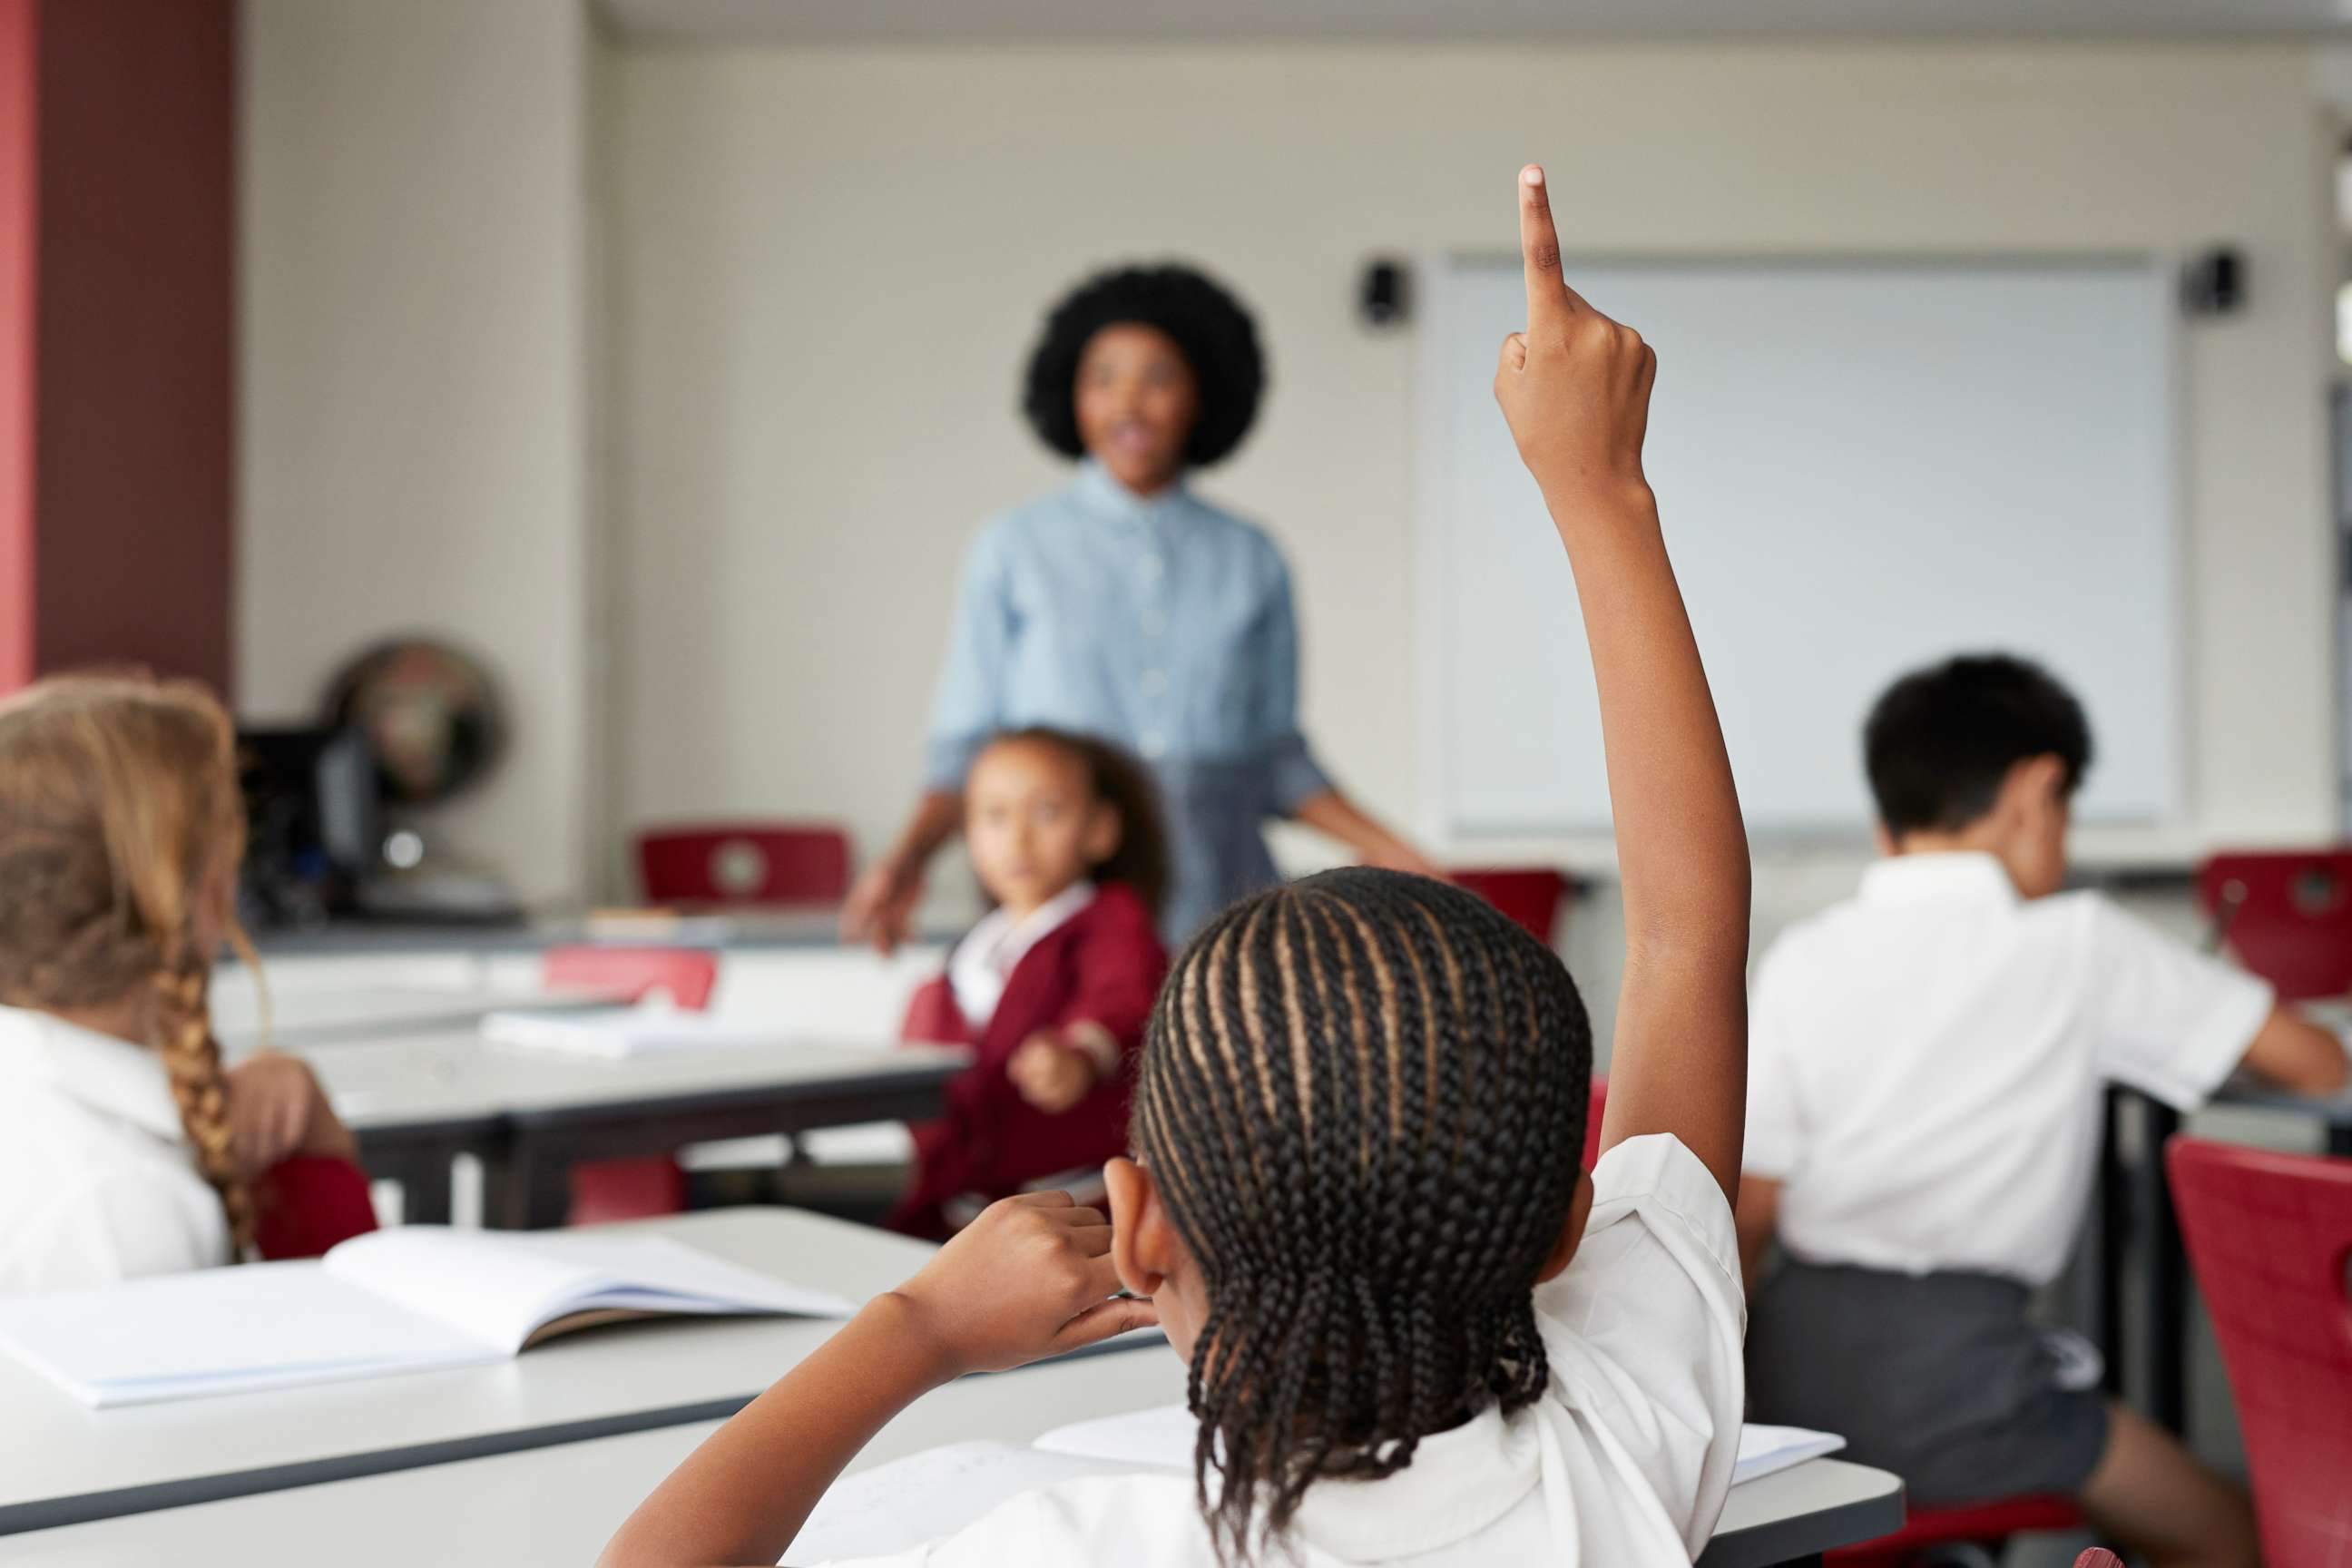 PHOTO: A child raises their hand during class in this stock photo. 